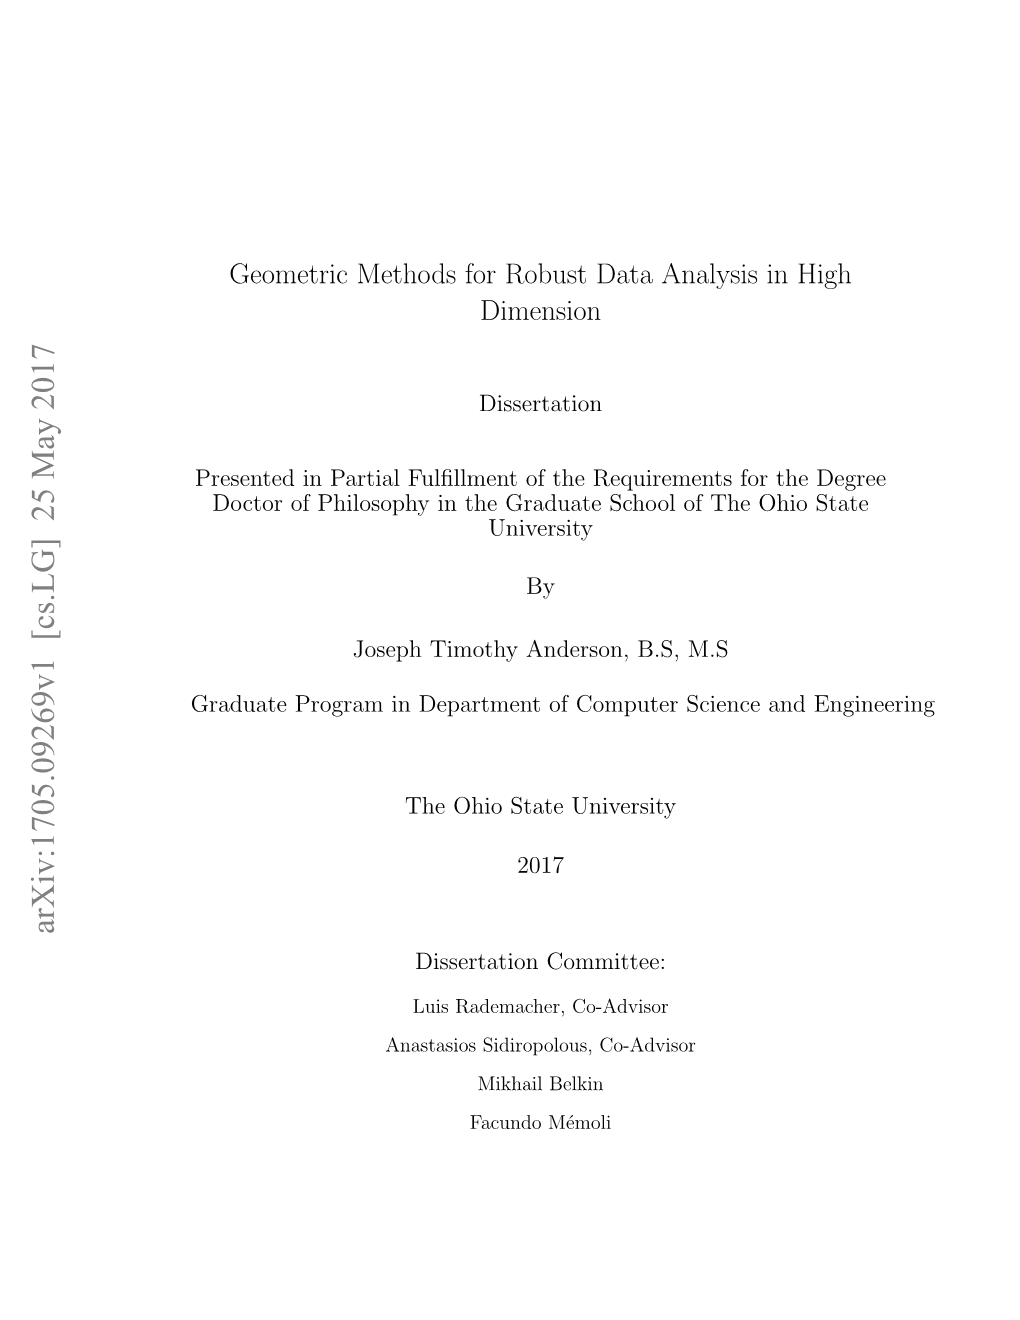 Geometric Methods for Robust Data Analysis in High Dimension